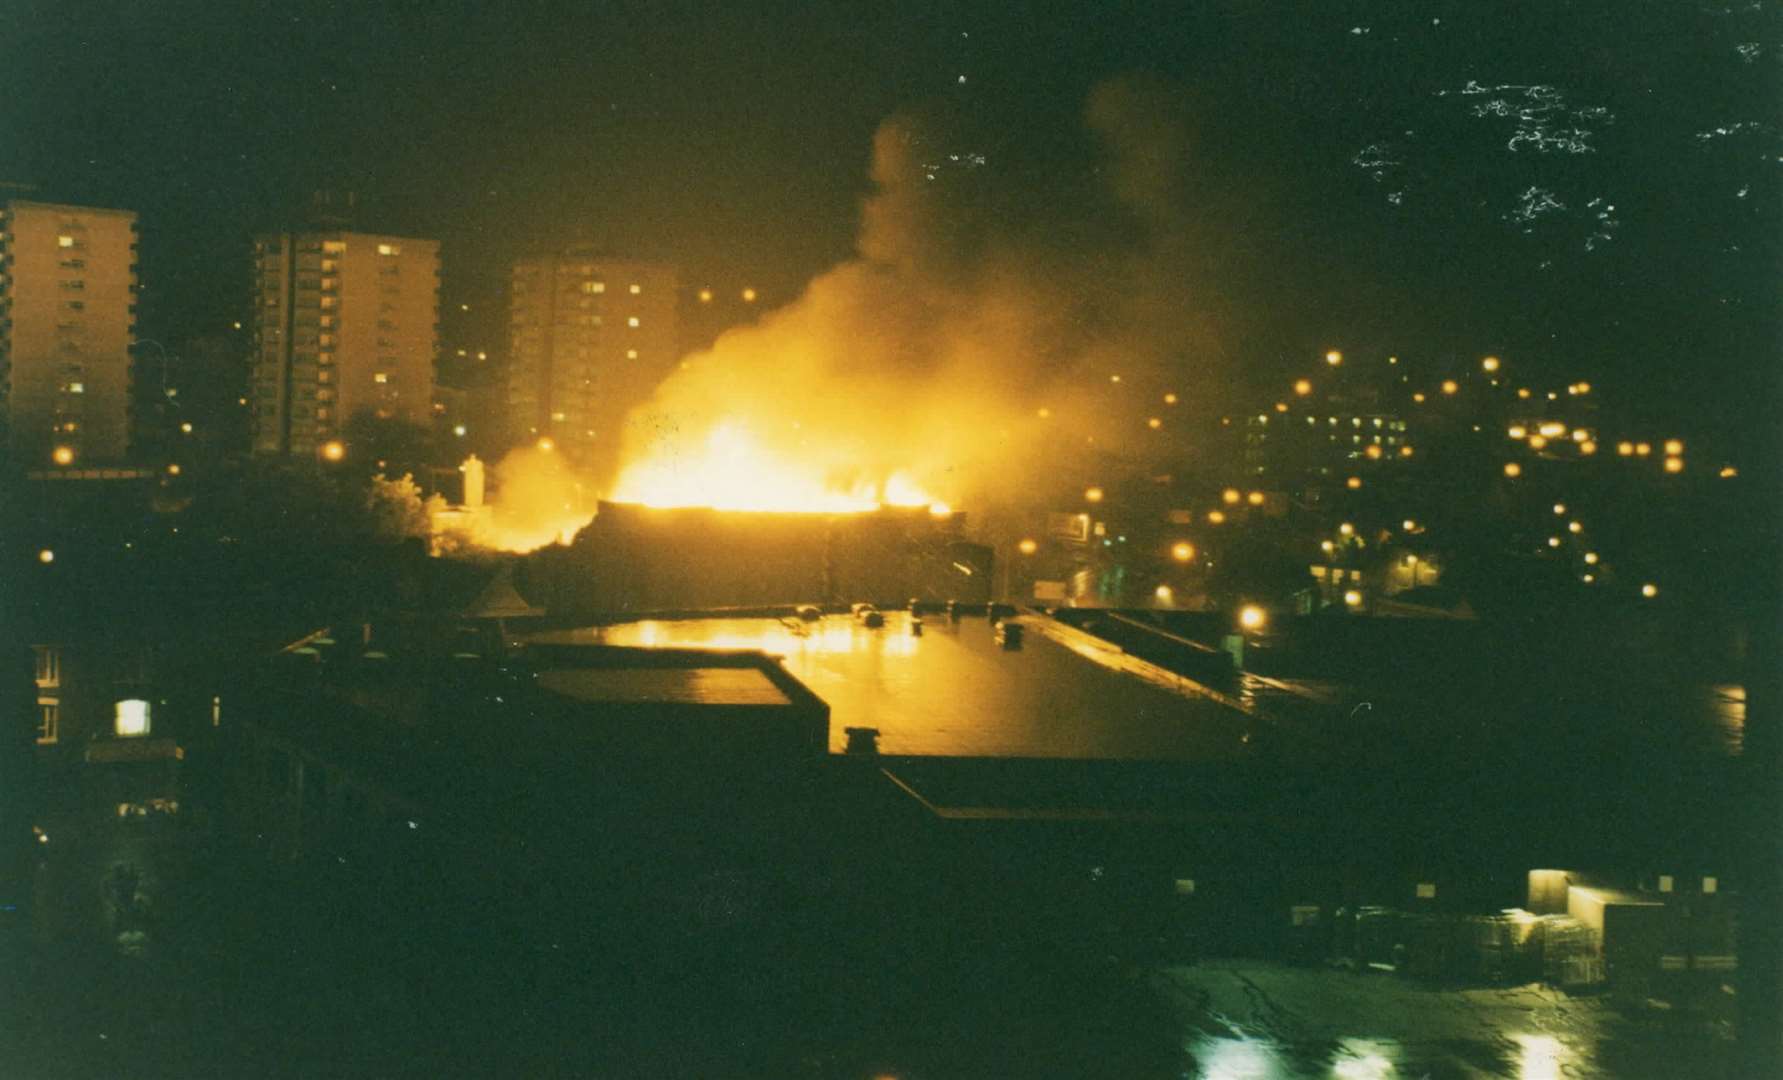 Fire ripped through the old Gala bingo building on September 30, 1998